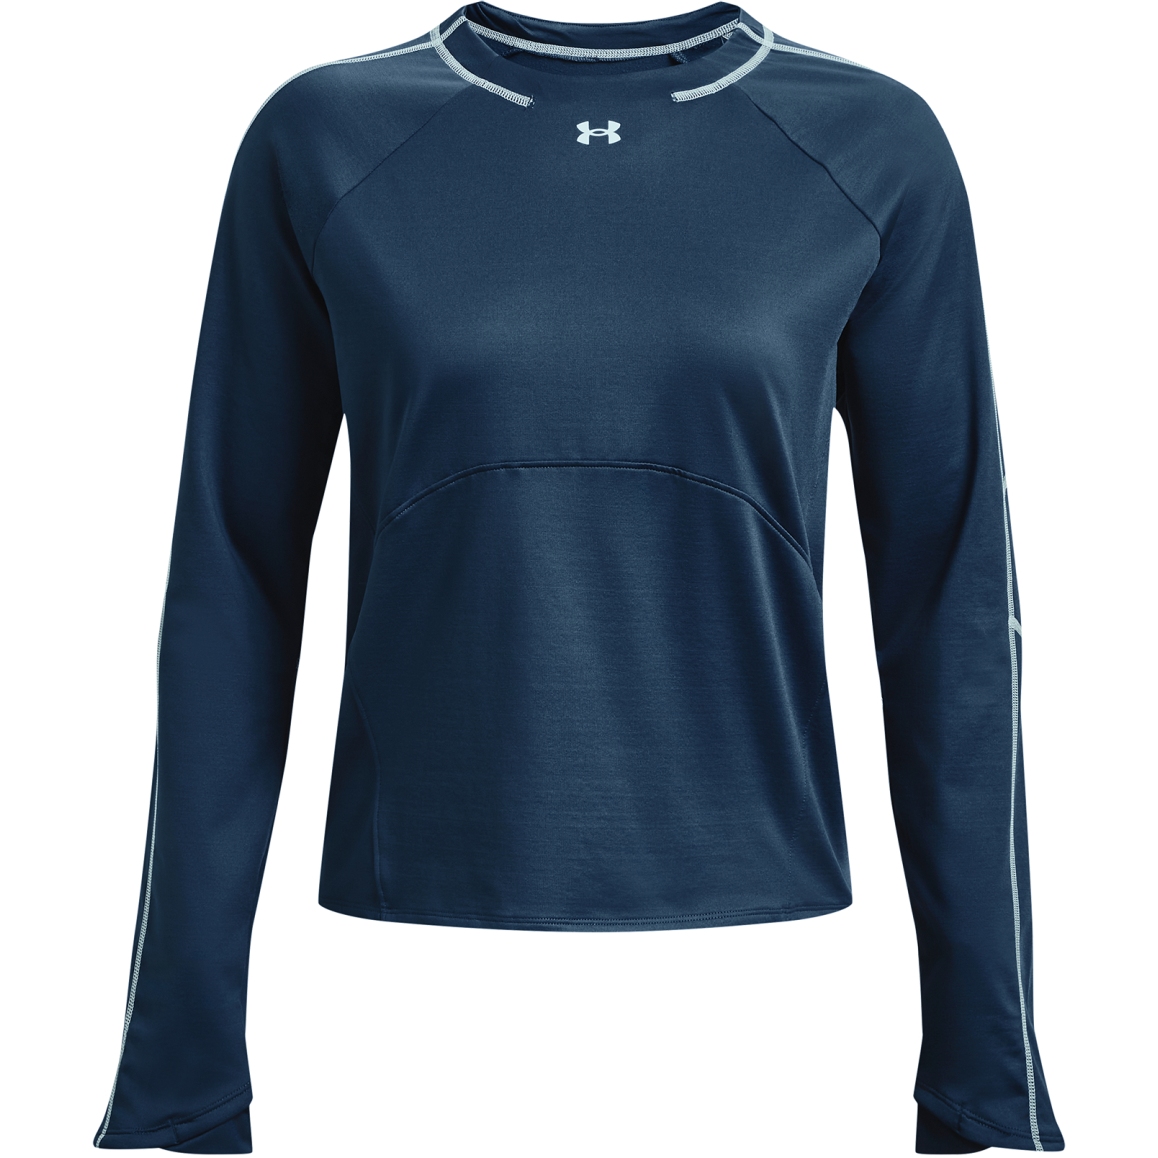 Under Armour Tops With Thumbholes For Winter